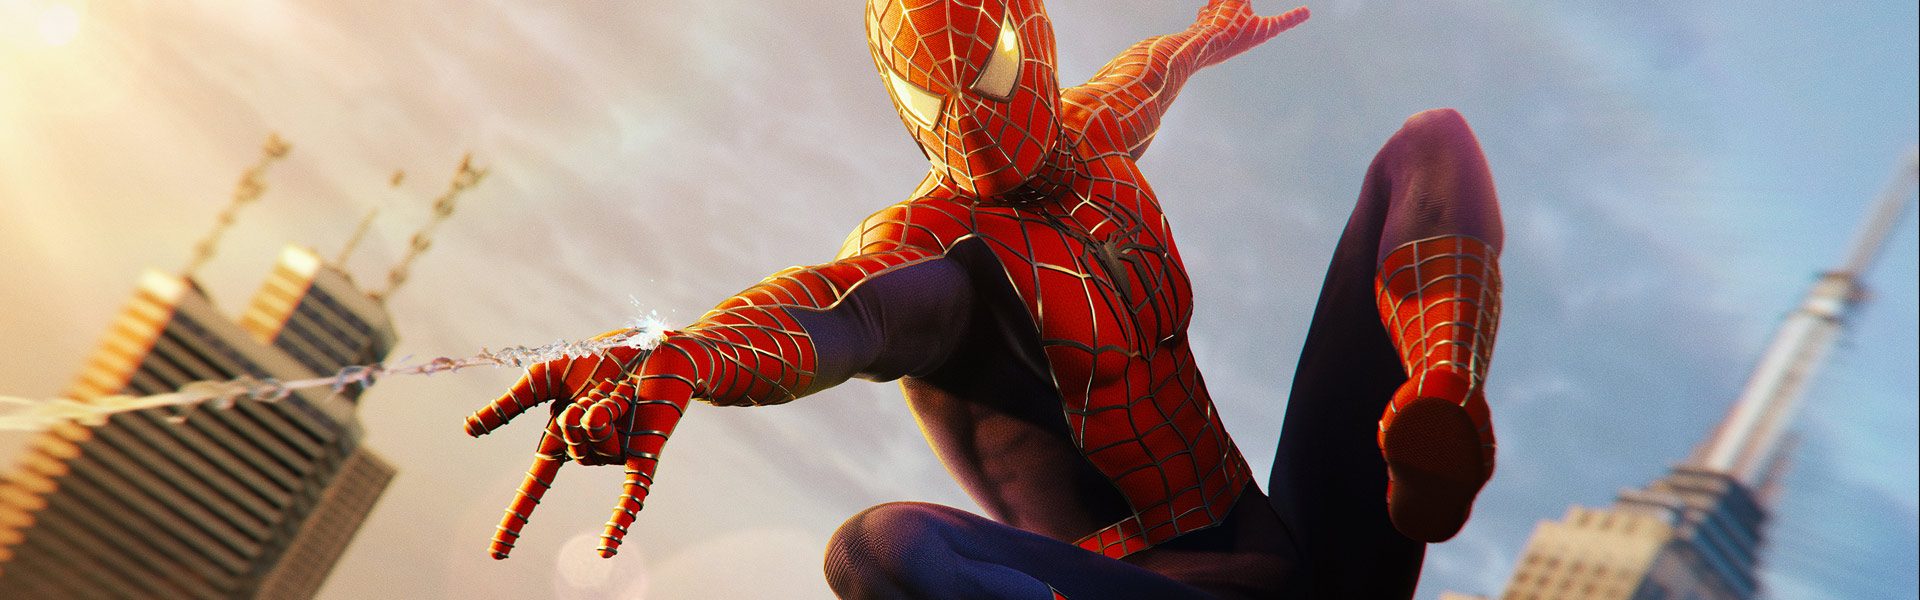 marvel spider man ps4 dlc silver lining release date